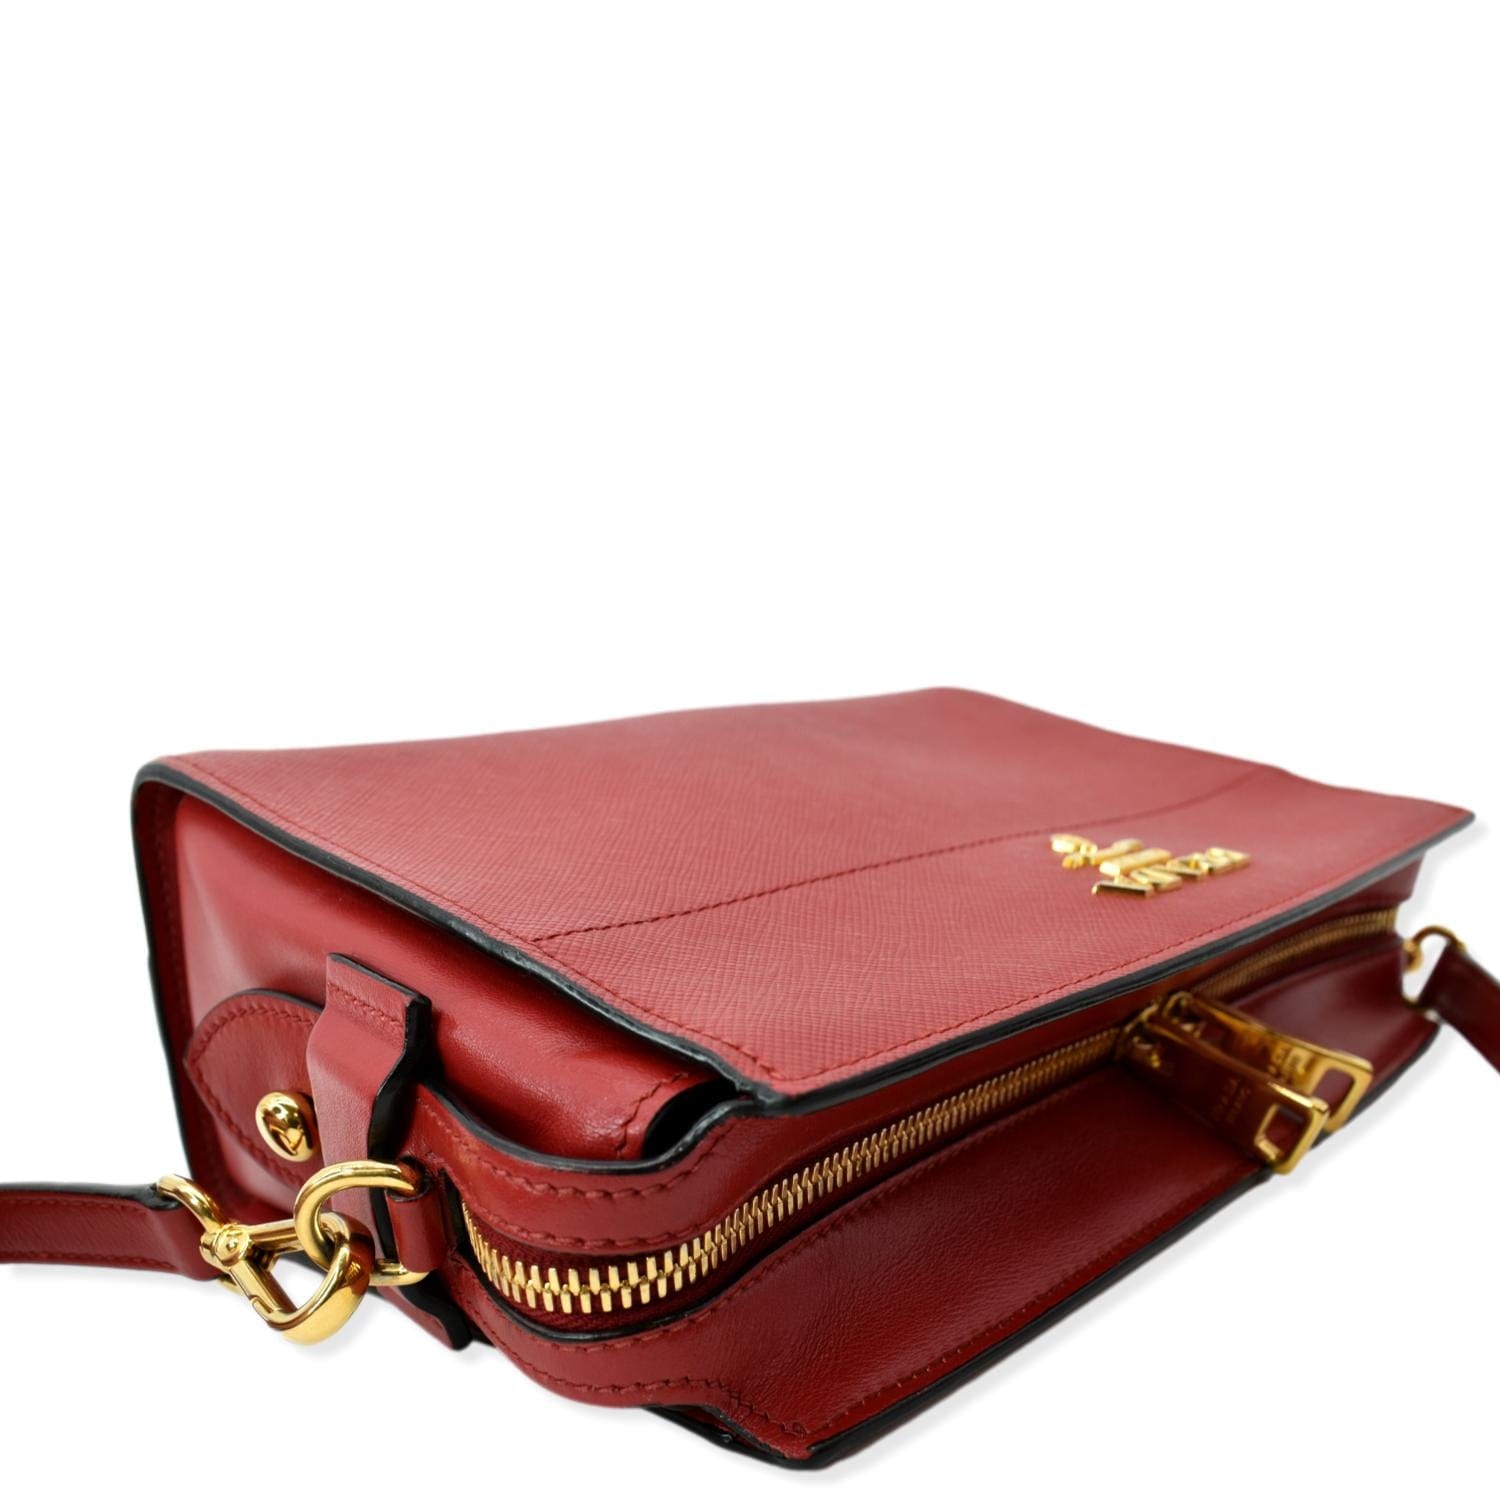 Prada Esplanade Leather Tote In Red and Black